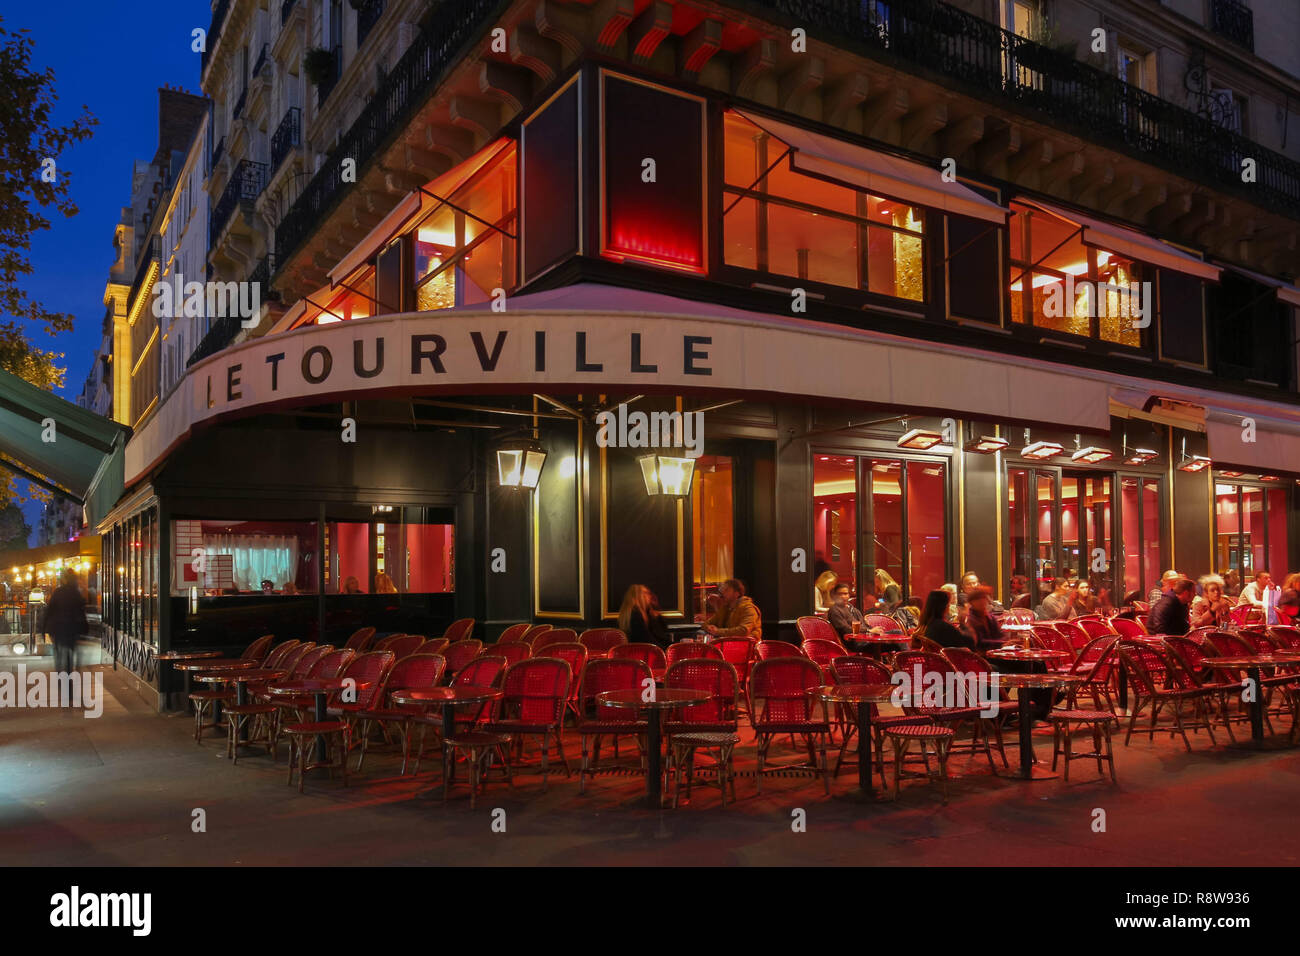 Le Tourville night view, a traditonal French cafe located near the ...